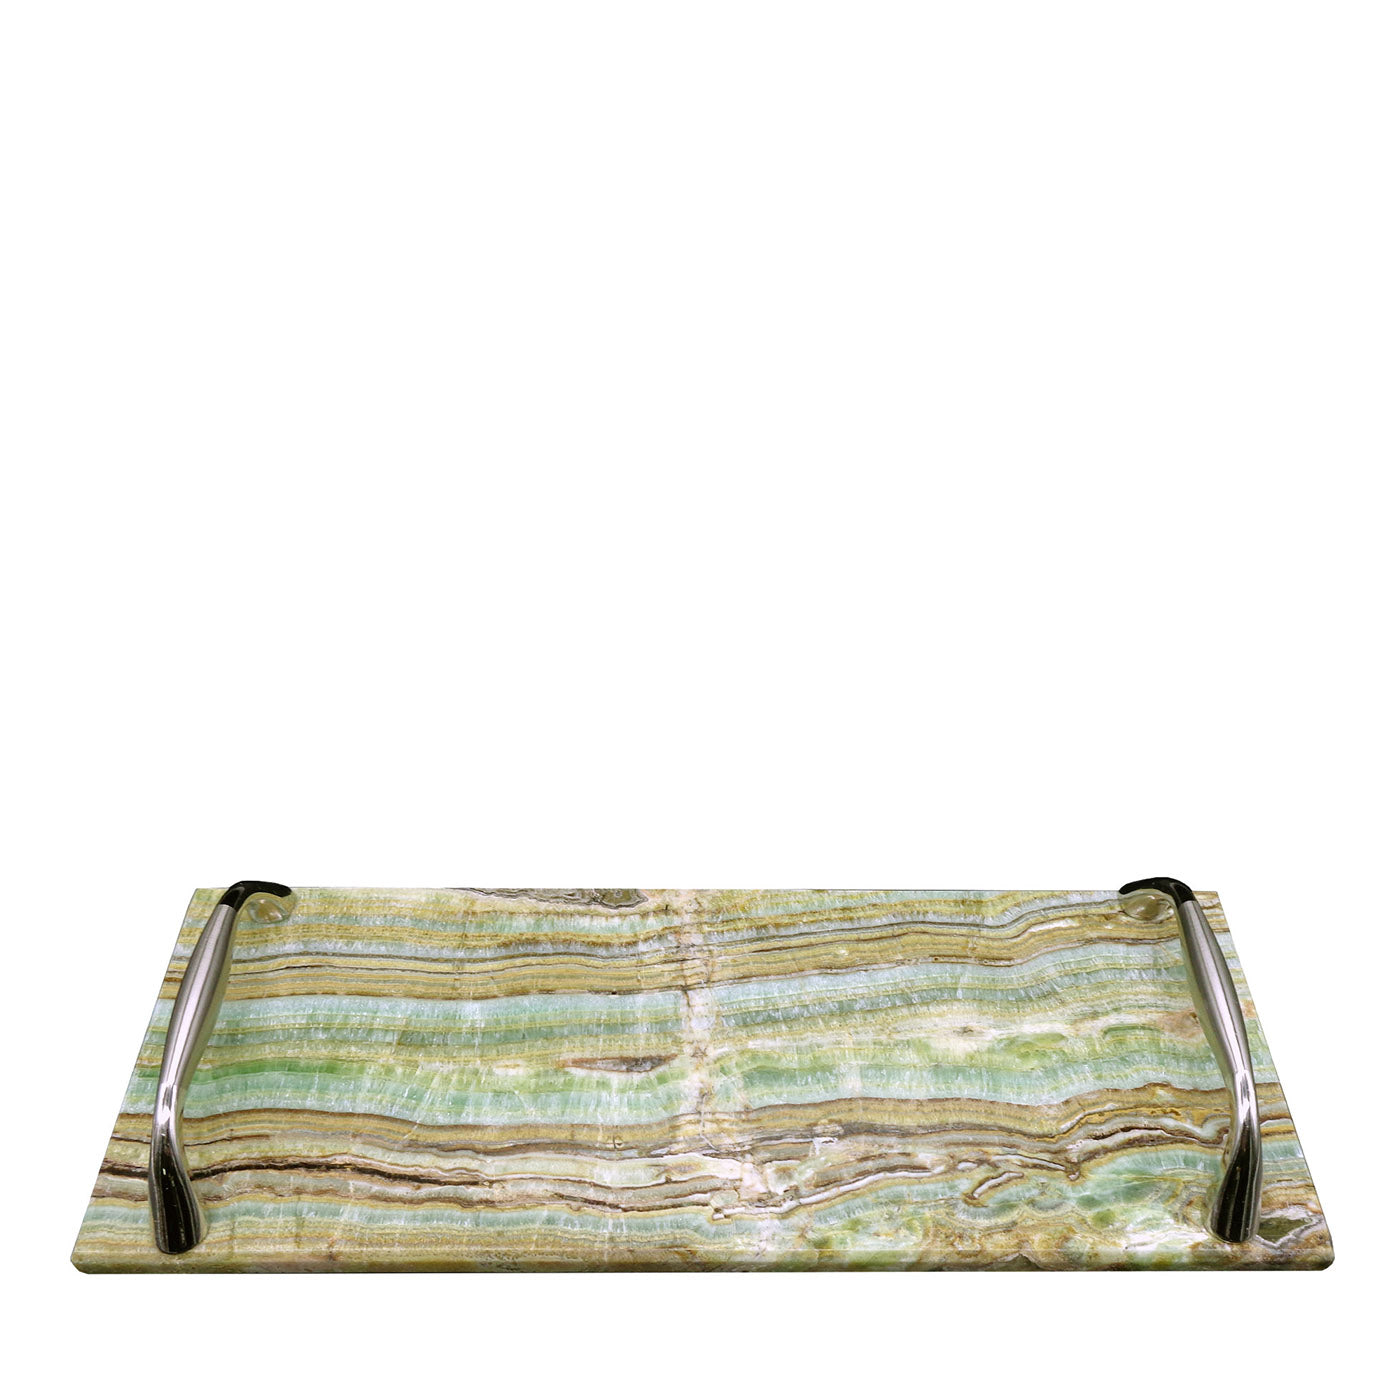 Rectangular Emerald Onyx Tray with Steel Handles #2 - Main view